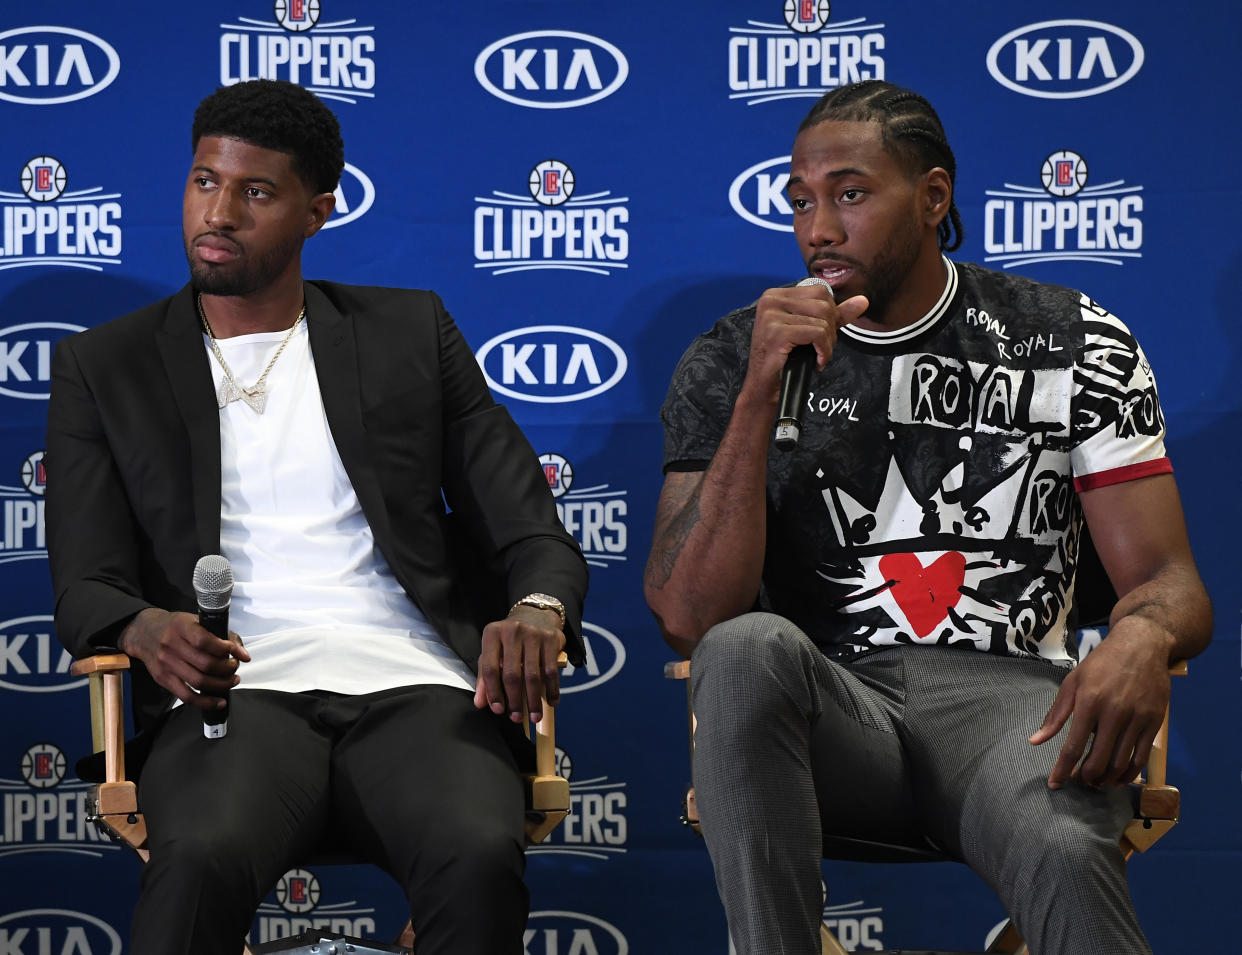 LOS ANGELES, CA - JULY 24: Kawhi Leonard speaks during his introductory news conference with Paul George at Green Meadows Recreation Center on July 24, 2019 in Los Angeles, California. NOTE TO USER: User expressly acknowledges and agrees that, by downloading and or using this photograph, User is consenting to the terms and conditions of the Getty Images License Agreement. at Green Meadows Recreation Center on July 24, 2019 in Los Angeles, California. (Photo by Kevork Djansezian/Getty Images)